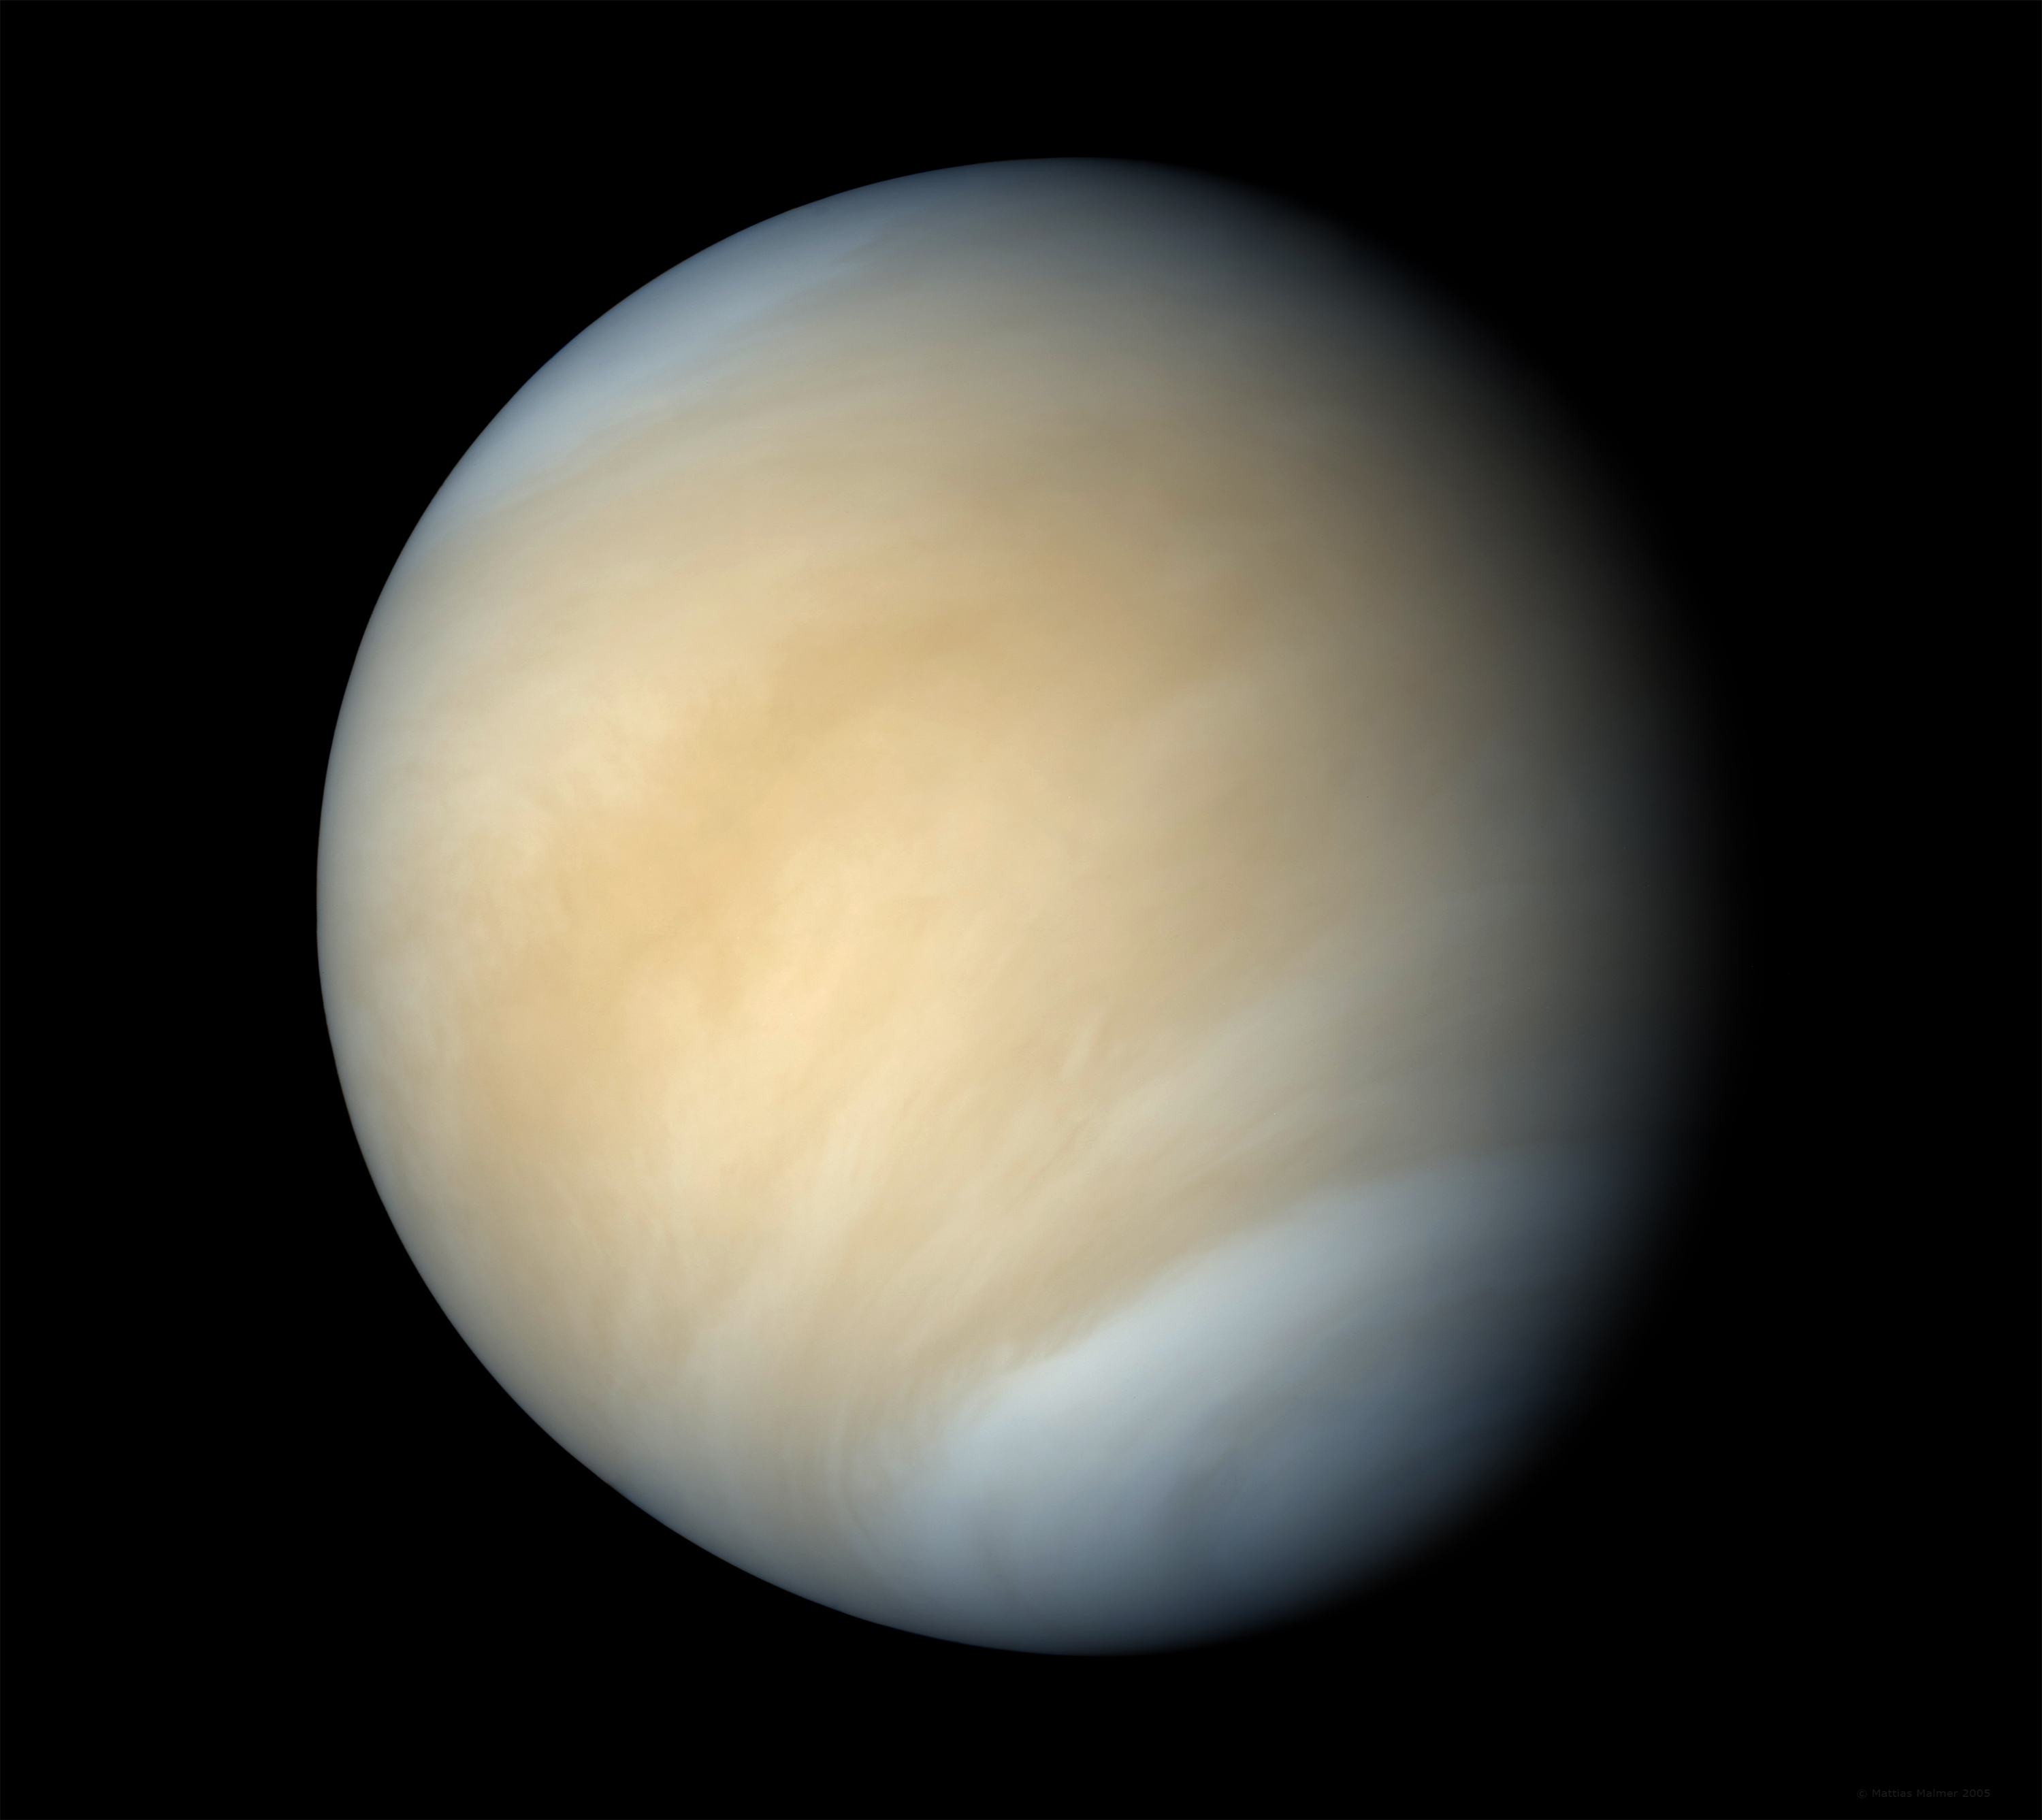 Sulfuric Acid Clouds On Venus Hide A Bizarre Anomaly That Spans The